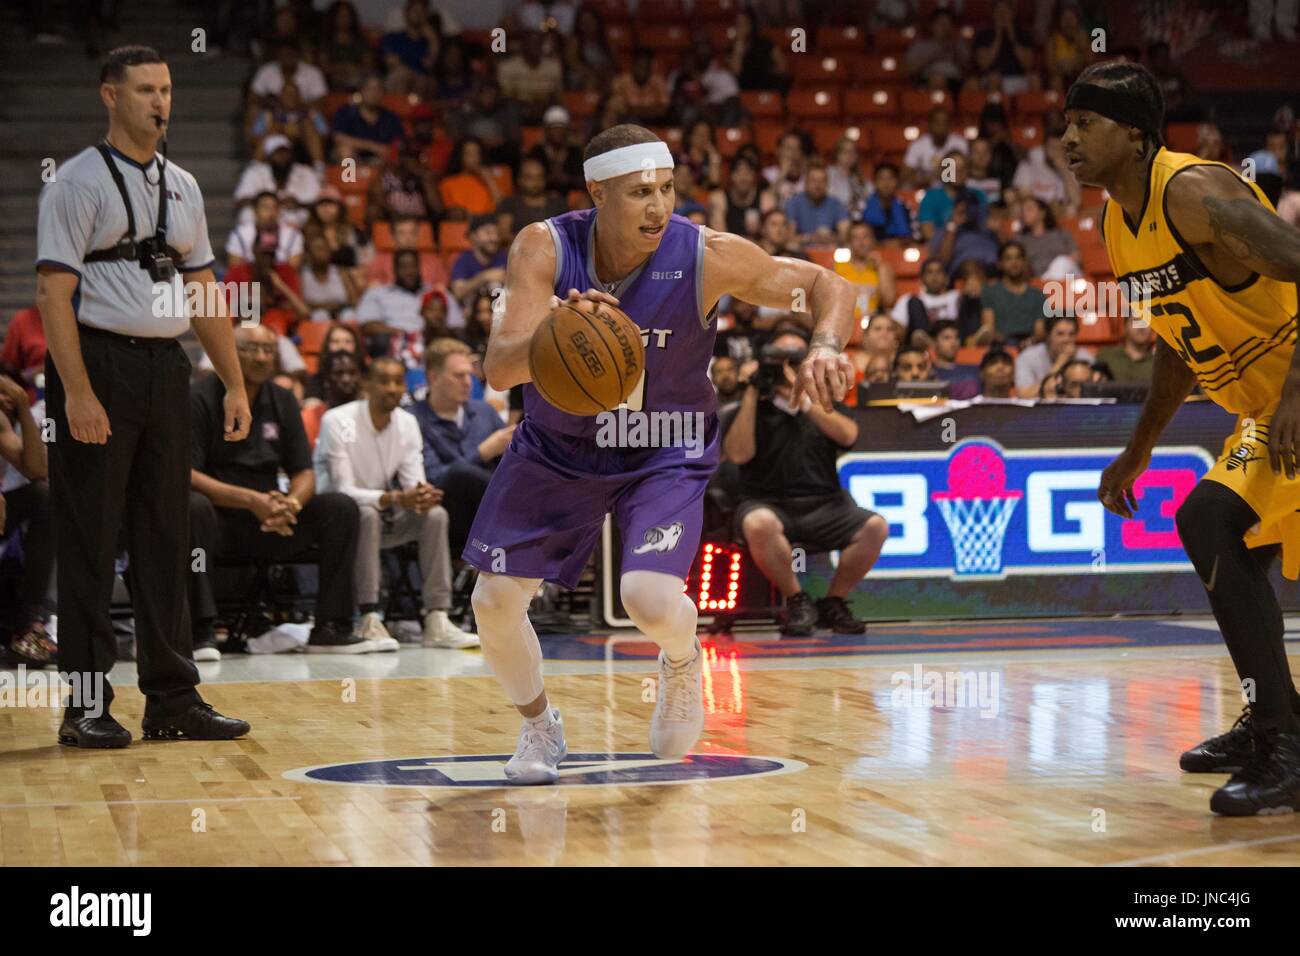 Mike Bibby #10 Ghost Ballers attempts to dribble past Eddie Robinson #32 Killer 3s Big3 Week 5 UIC Pavilion July 23,2017 Chicago,Illinois. Stock Photo